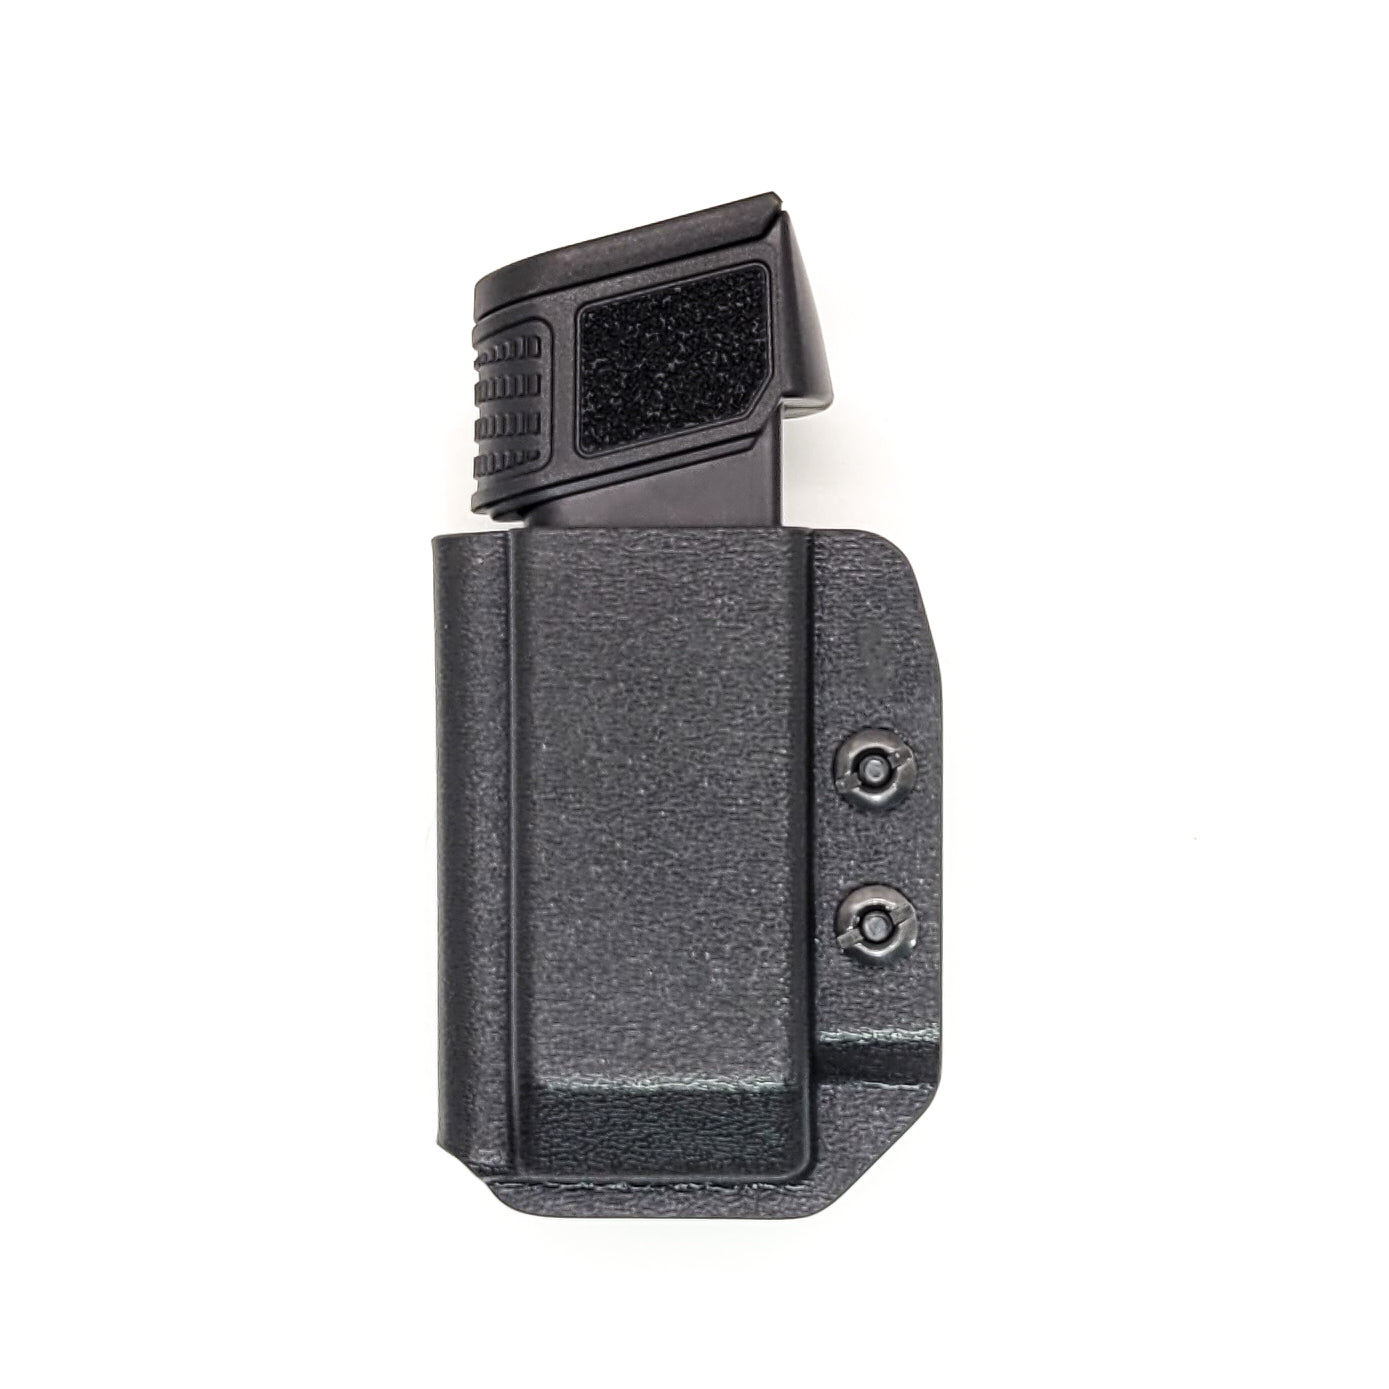 For the Best, most comfortable, Kydex IWB AIWB appendix inside waistband magazine pouch for FN Reflex, shop Four Brothers Holsters. Suitable for belt widths of 1 1/2" & 1 3/4". Adjustable retention. Appendix Carry Carrier Holster Hellcat Pro, Sig P365XL, Glock 43X & 48, Smith and Wesson Equalizer, and Shield Plus 9mm.